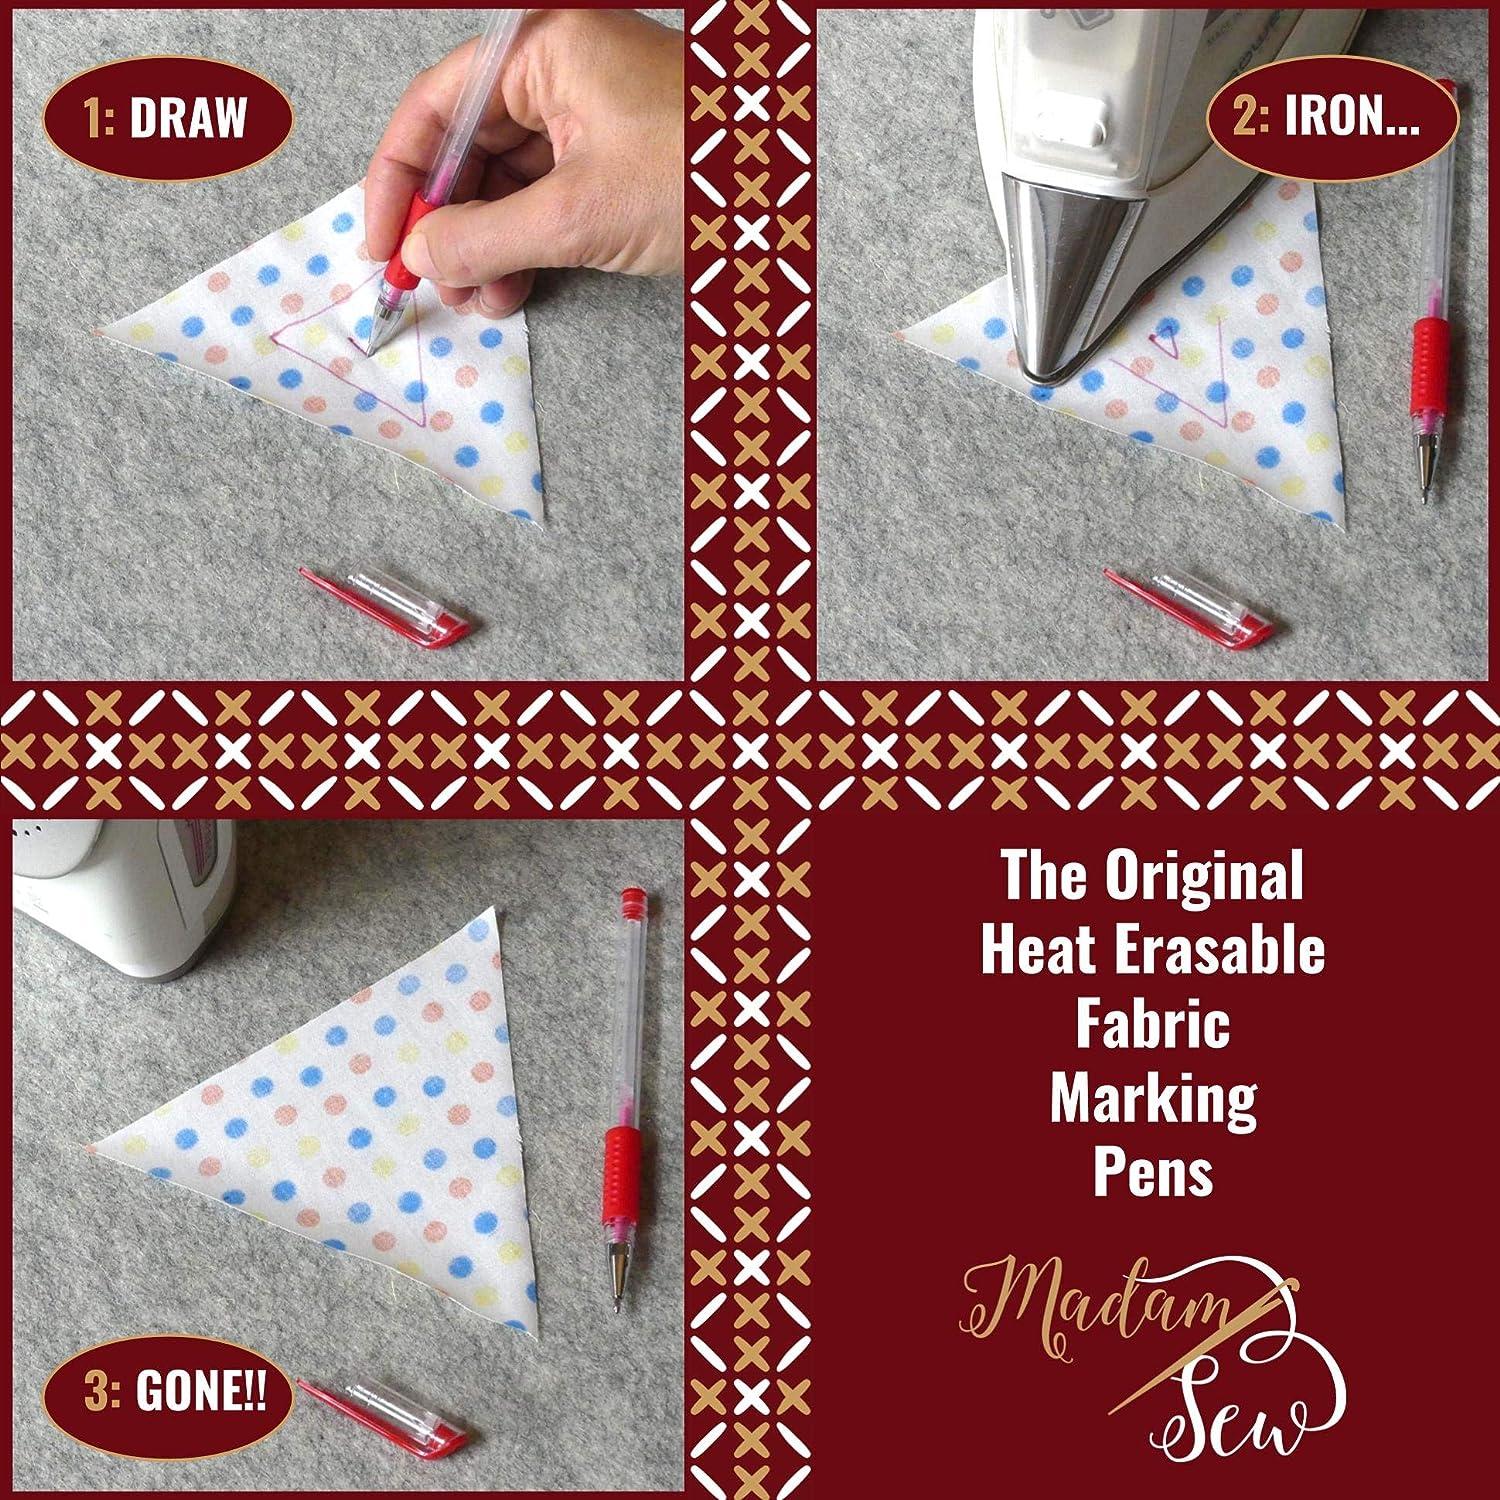 Are Frixion pens safe to use on quilts? - The Crafty Quilter